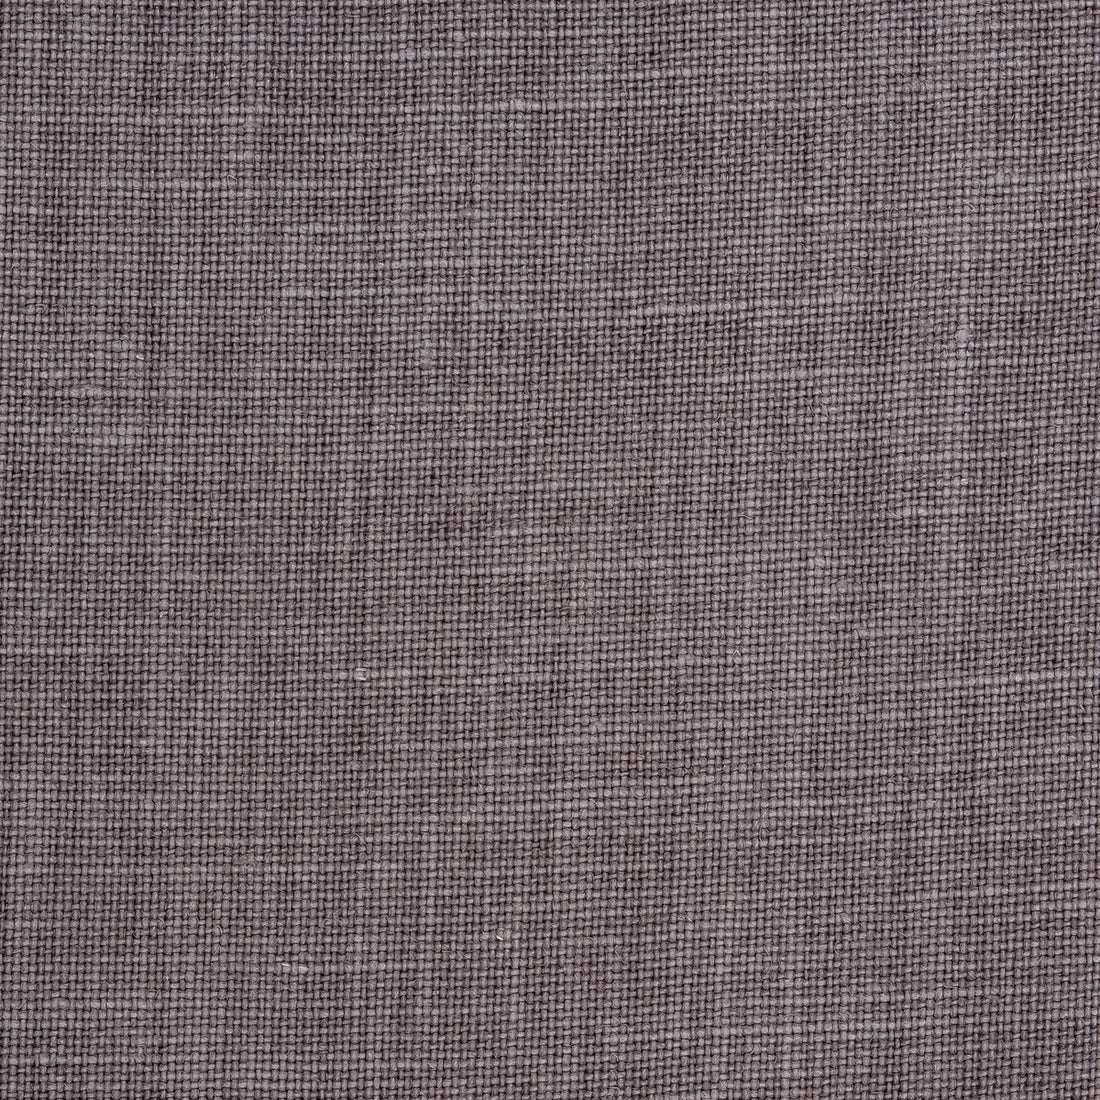 Lille Linen fabric in thistle color - pattern 2017119.10.0 - by Lee Jofa in the Perfect Plains collection